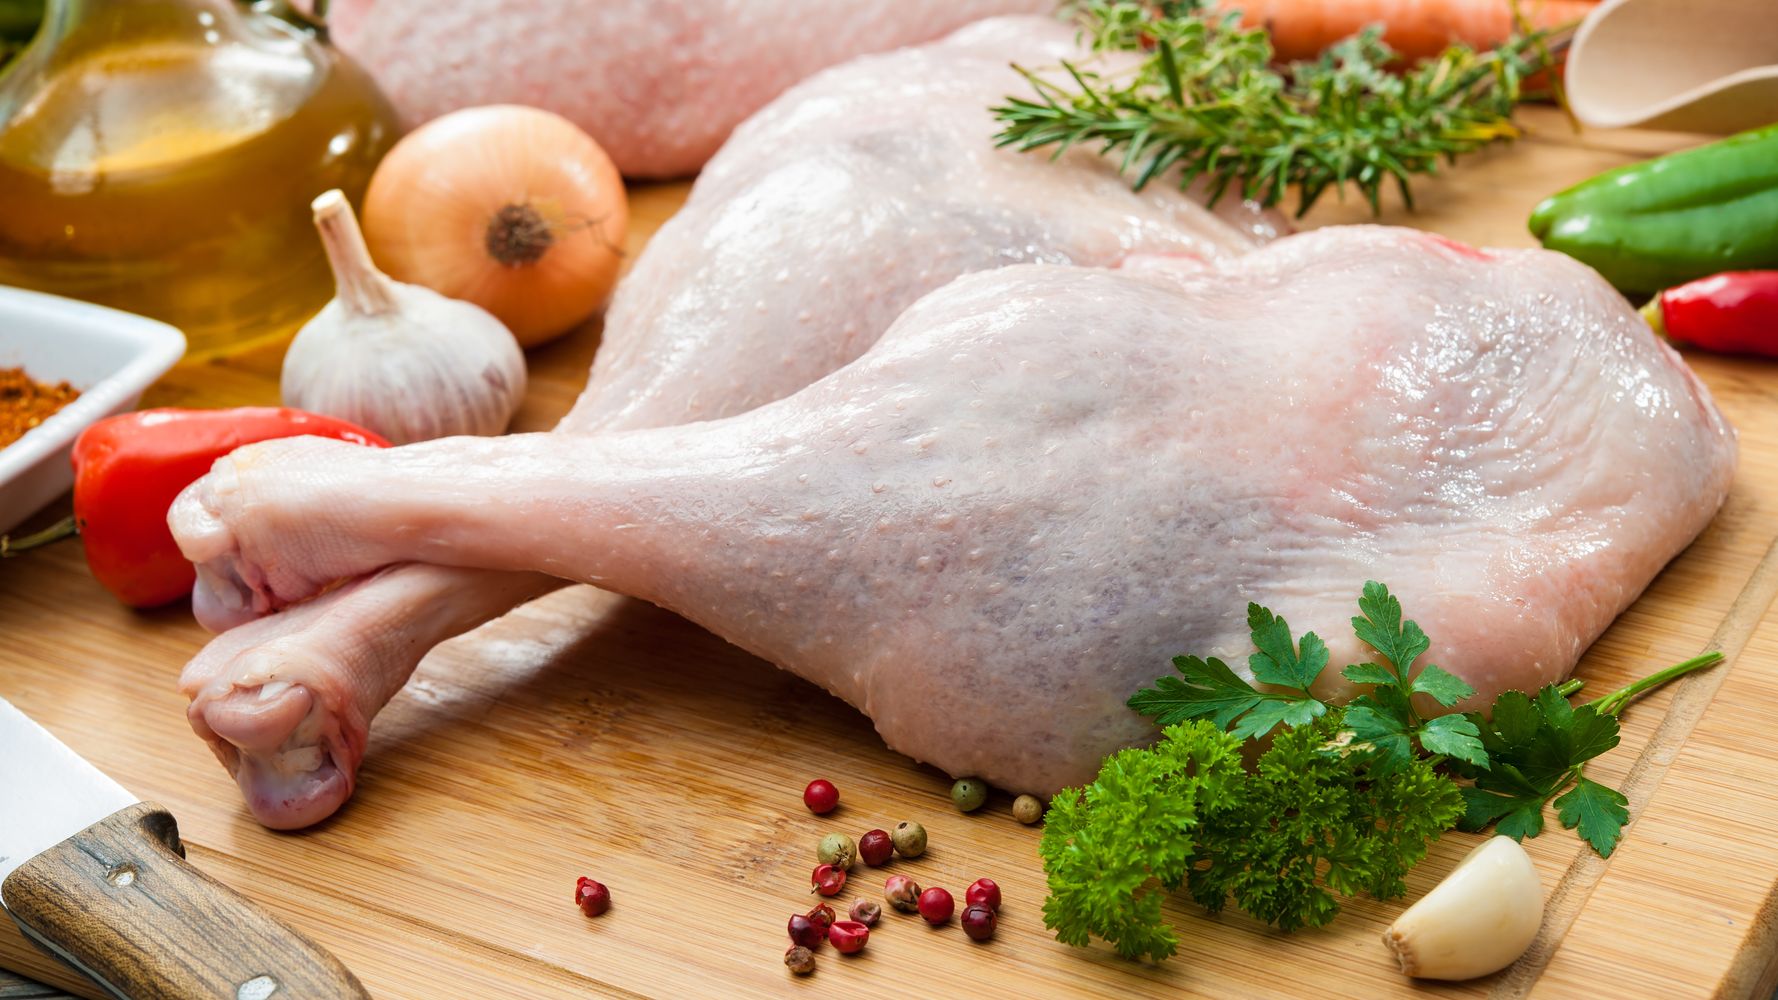 Do You Need To Clean Your Turkey Before Cooking It?